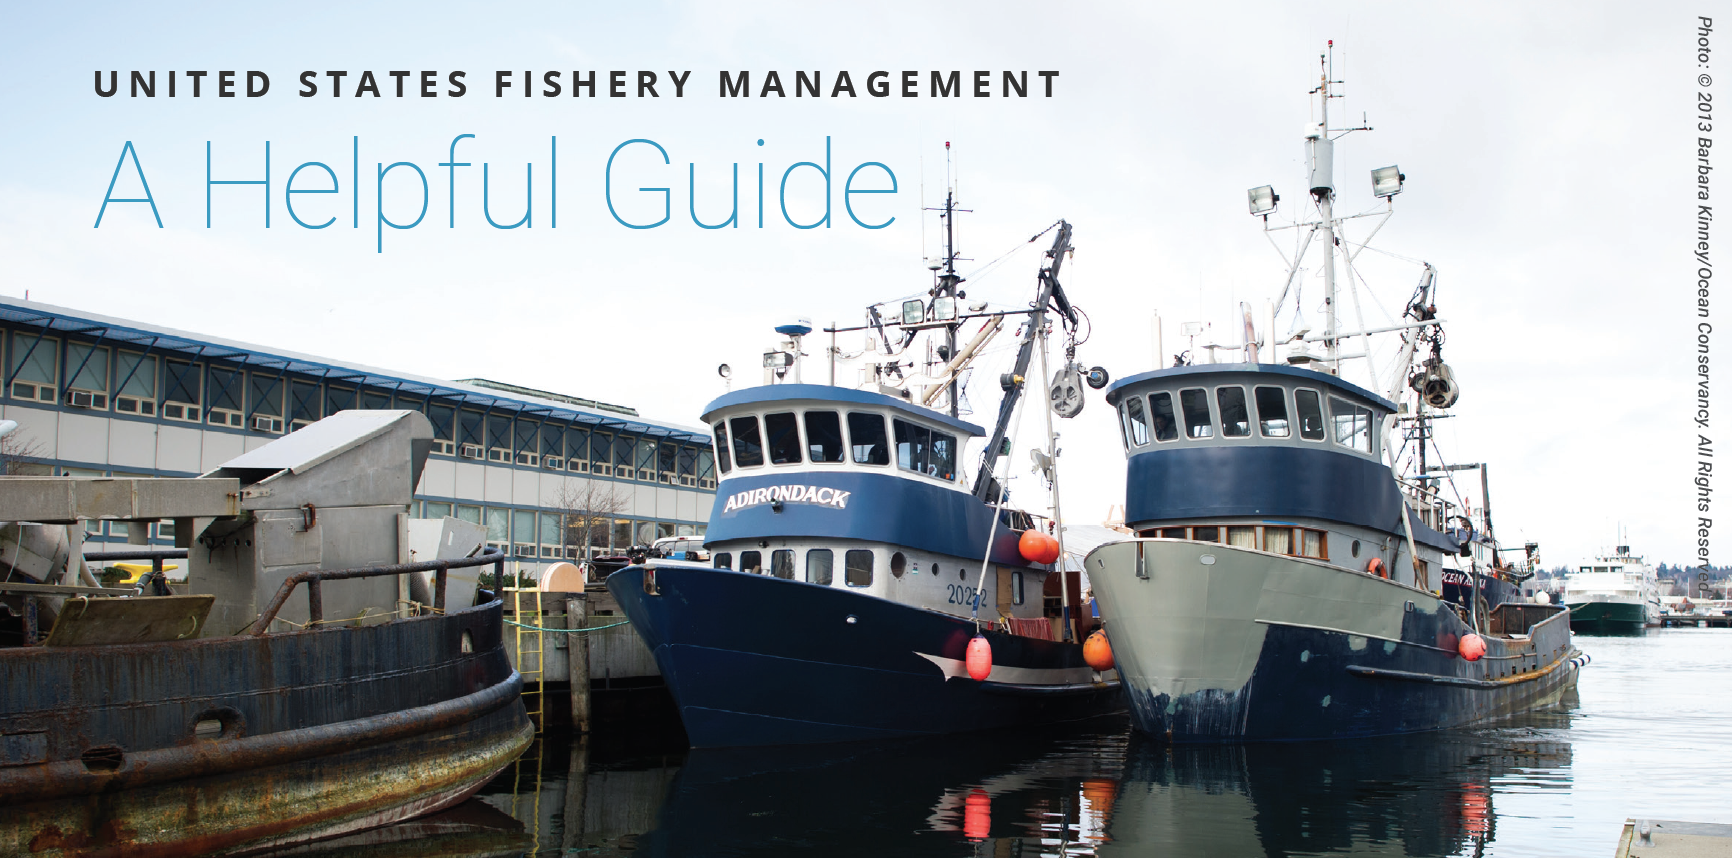 Fact Sheet: A Helpful Guide to United States Fishery Management